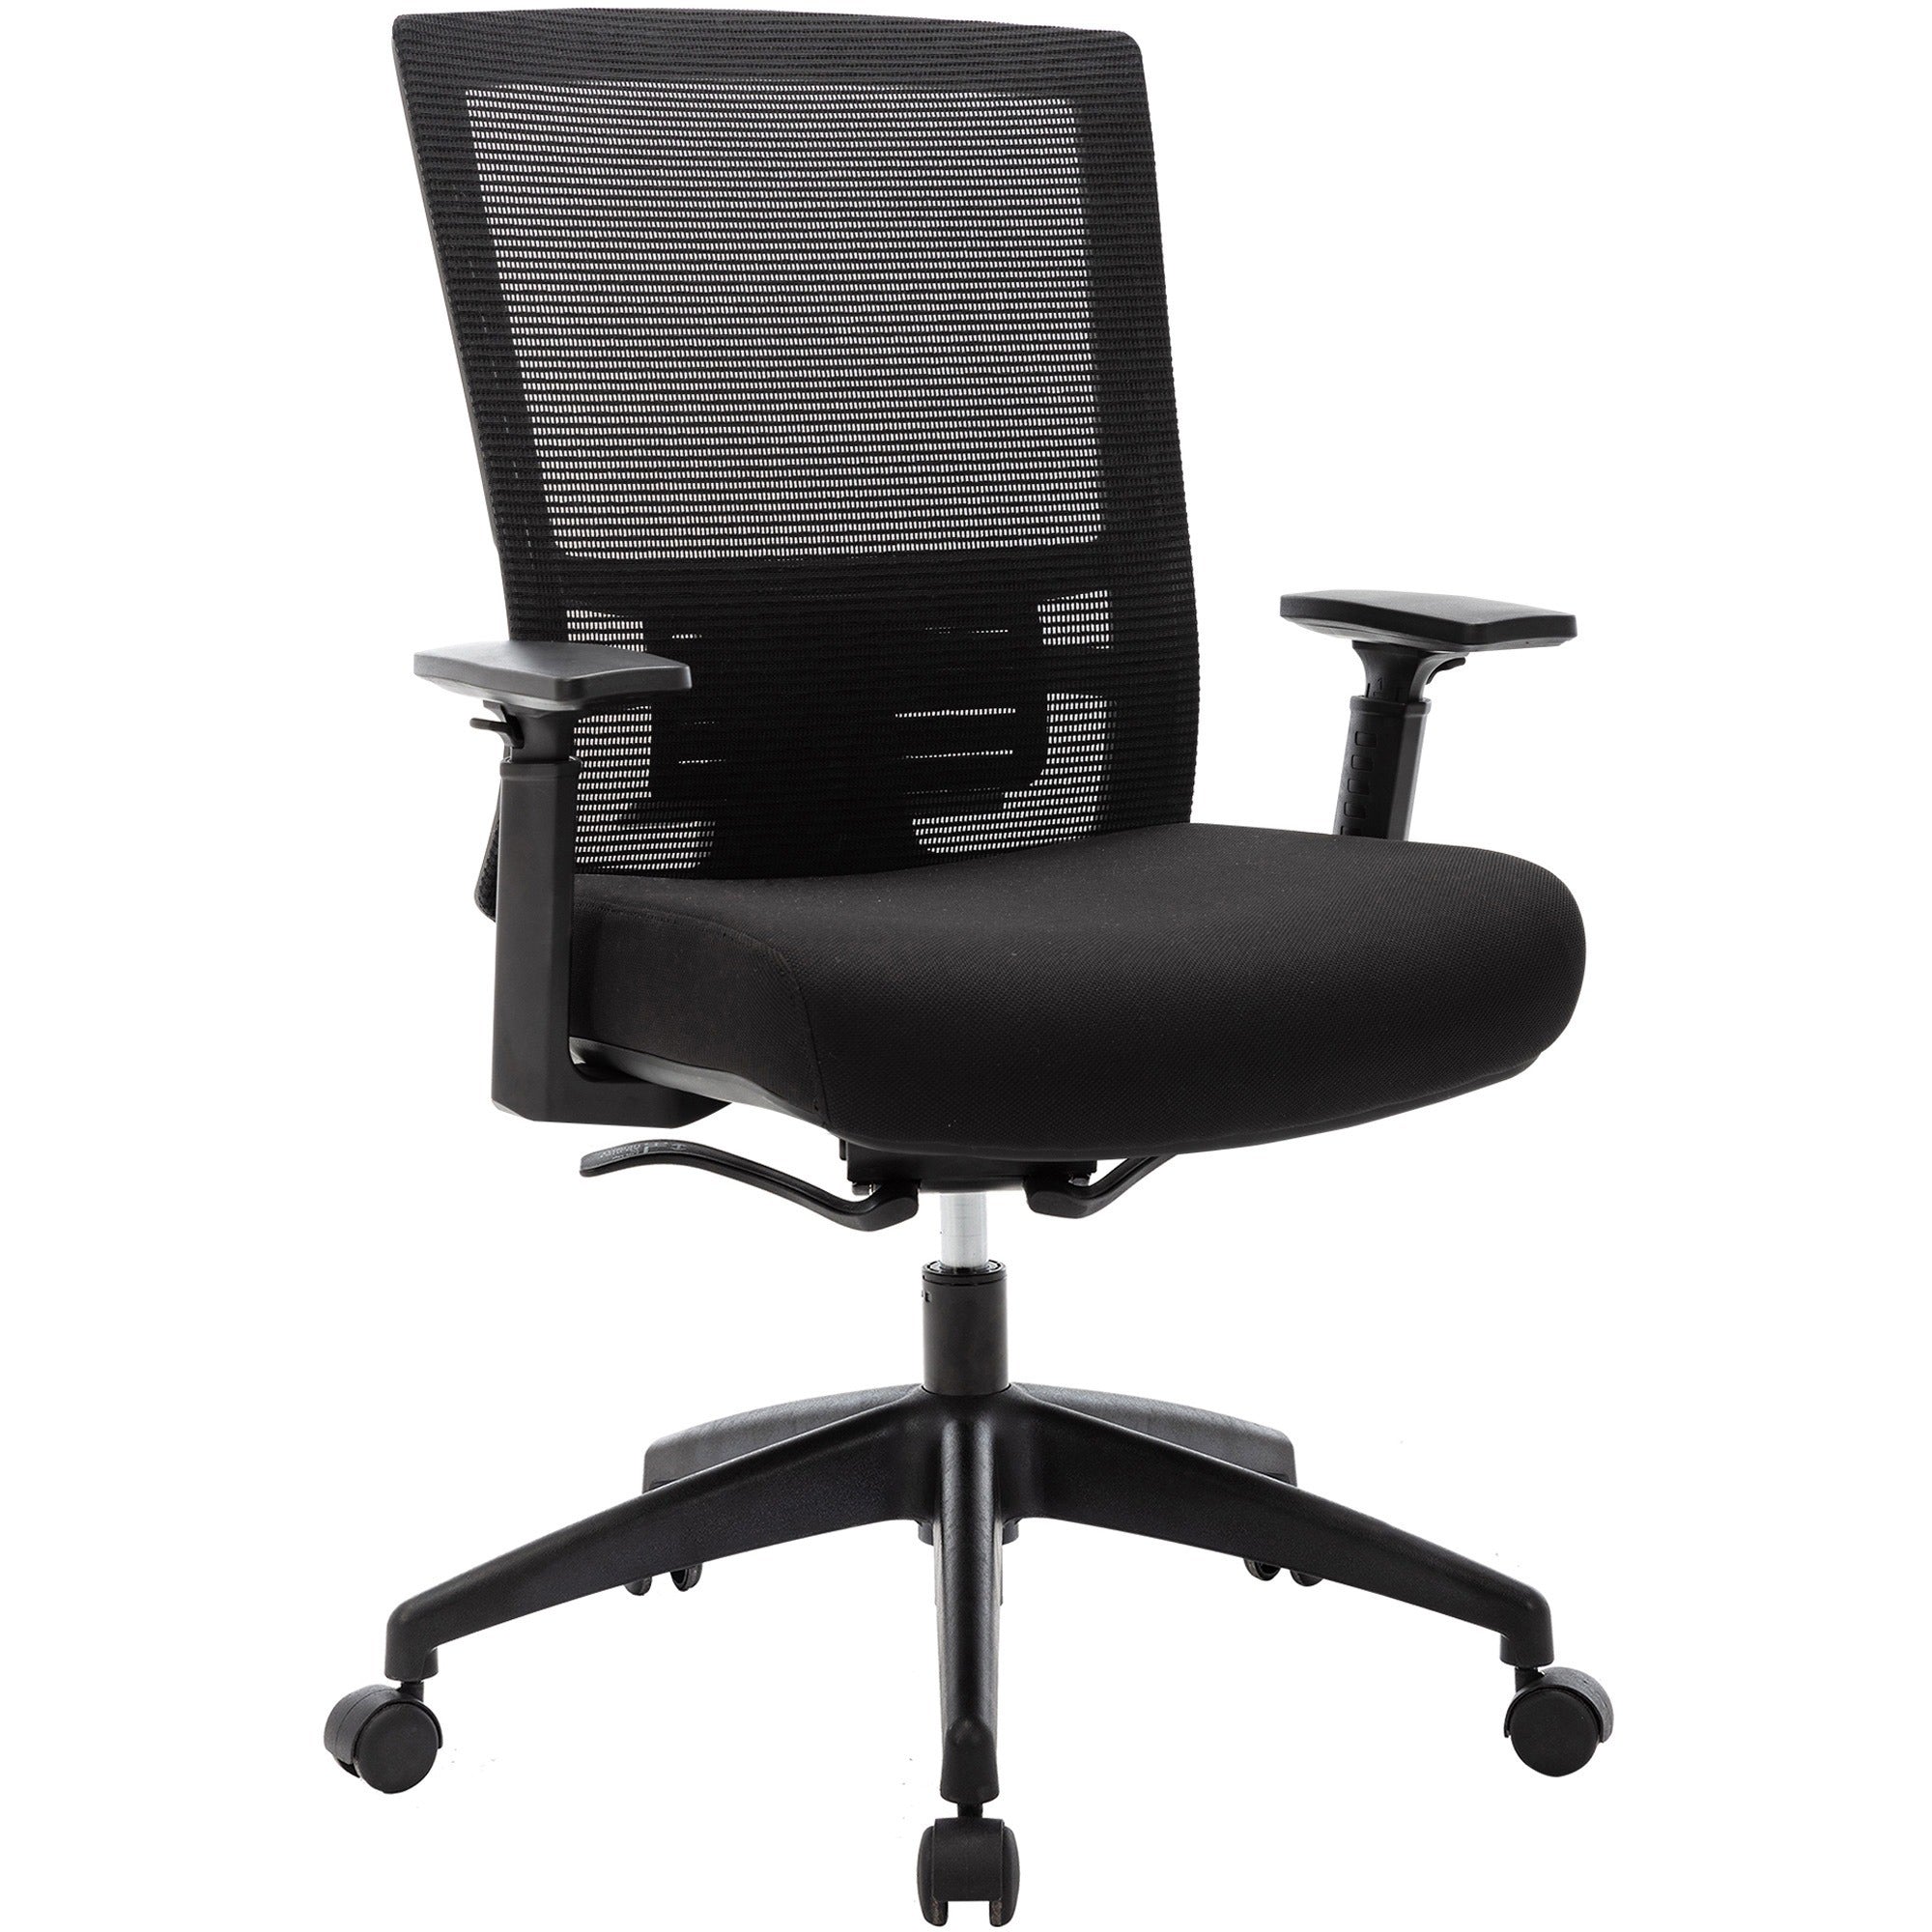 lorell-mesh-mid-back-office-chair-fabric-seat-mid-back-5-star-base-black-1-each_llr62626 - 1